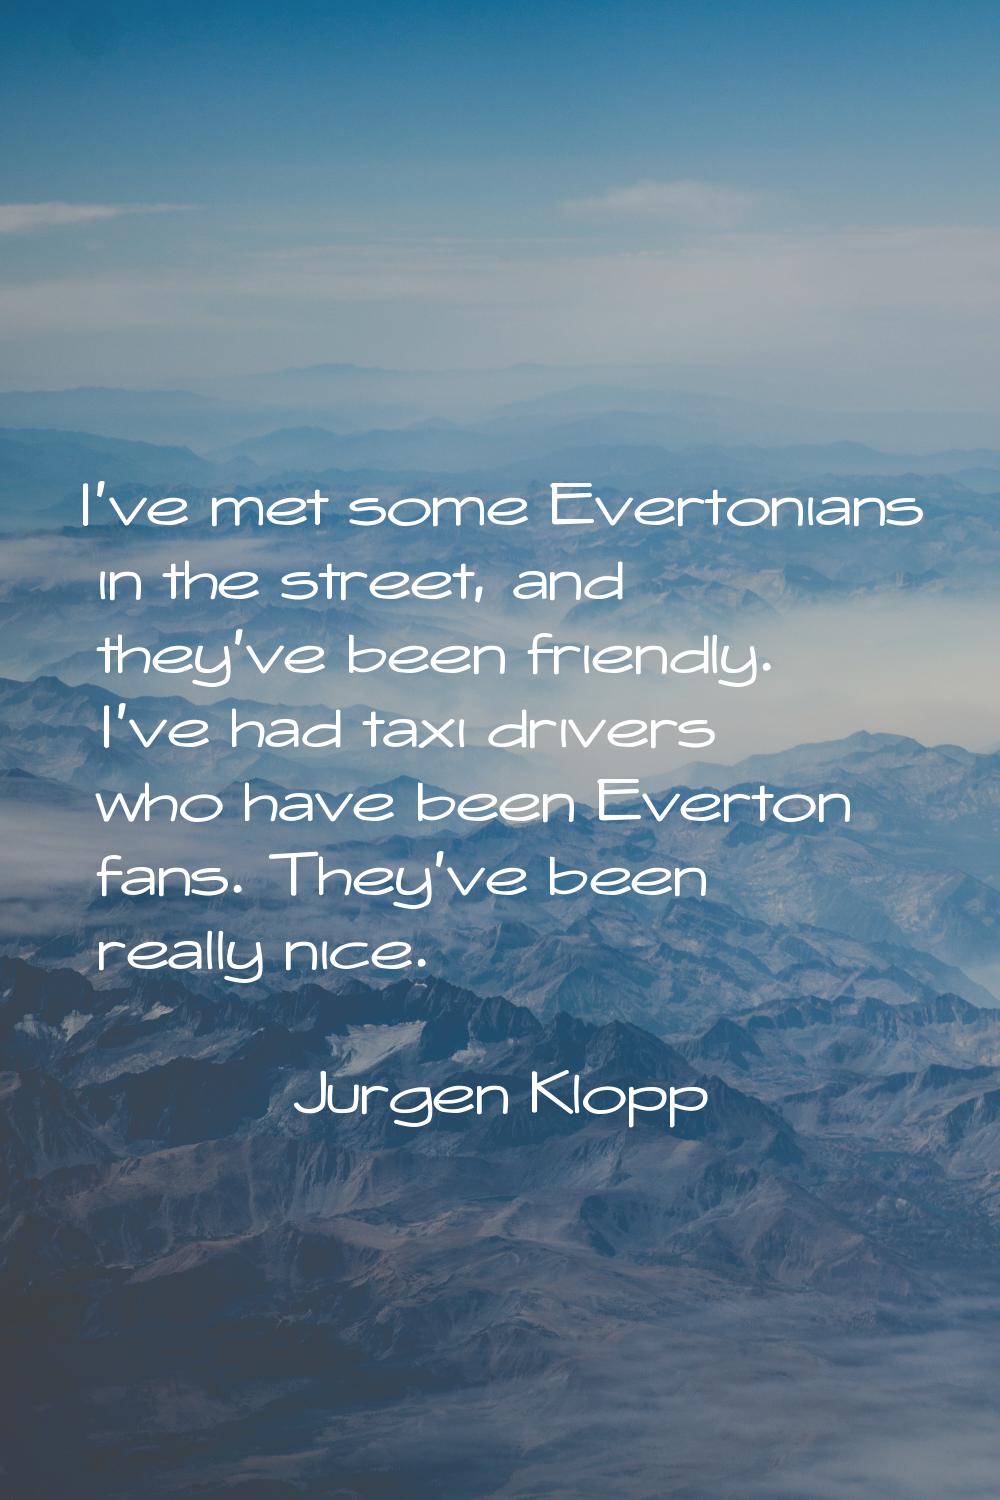 I've met some Evertonians in the street, and they've been friendly. I've had taxi drivers who have 